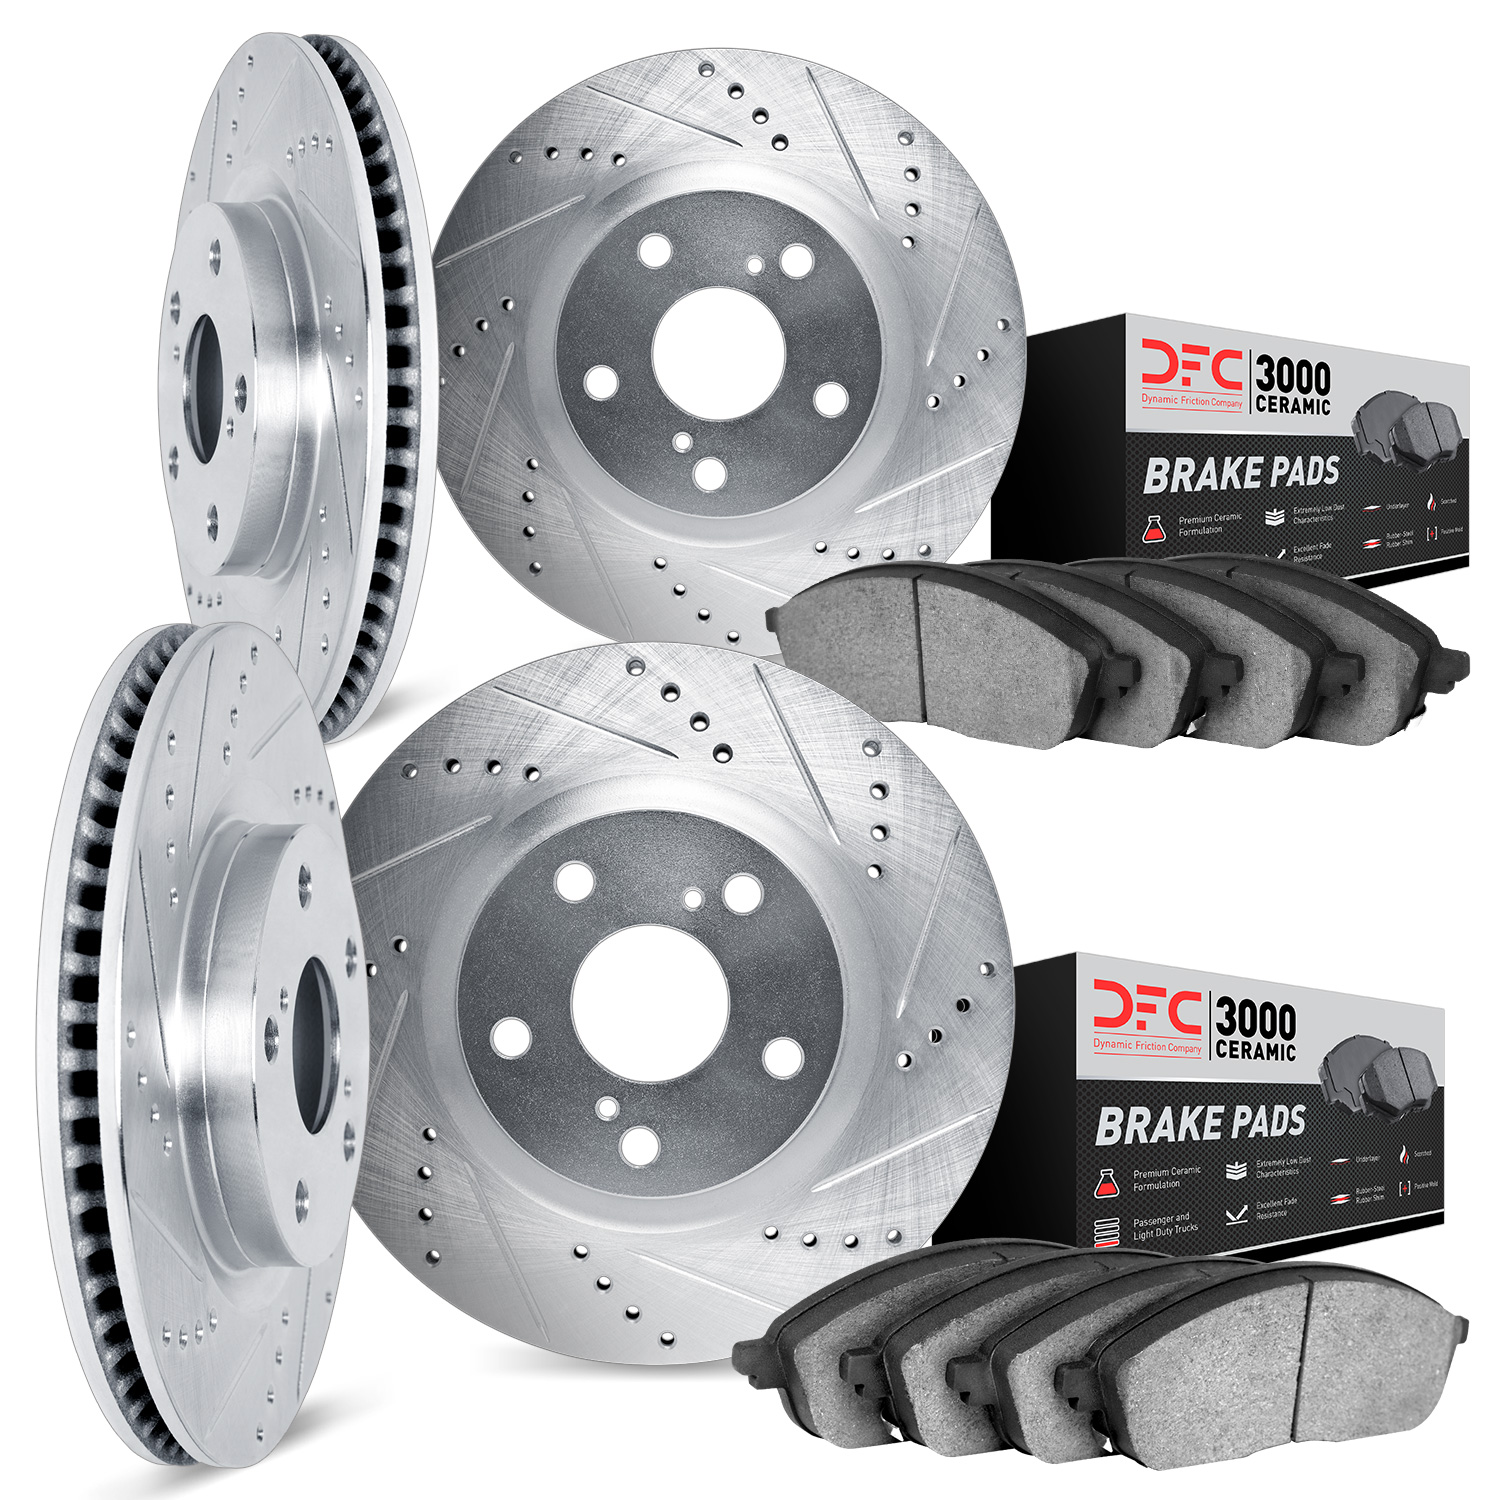 7304-76035 Drilled/Slotted Brake Rotor with 3000-Series Ceramic Brake Pads Kit [Silver], 1993-1998 Lexus/Toyota/Scion, Position: